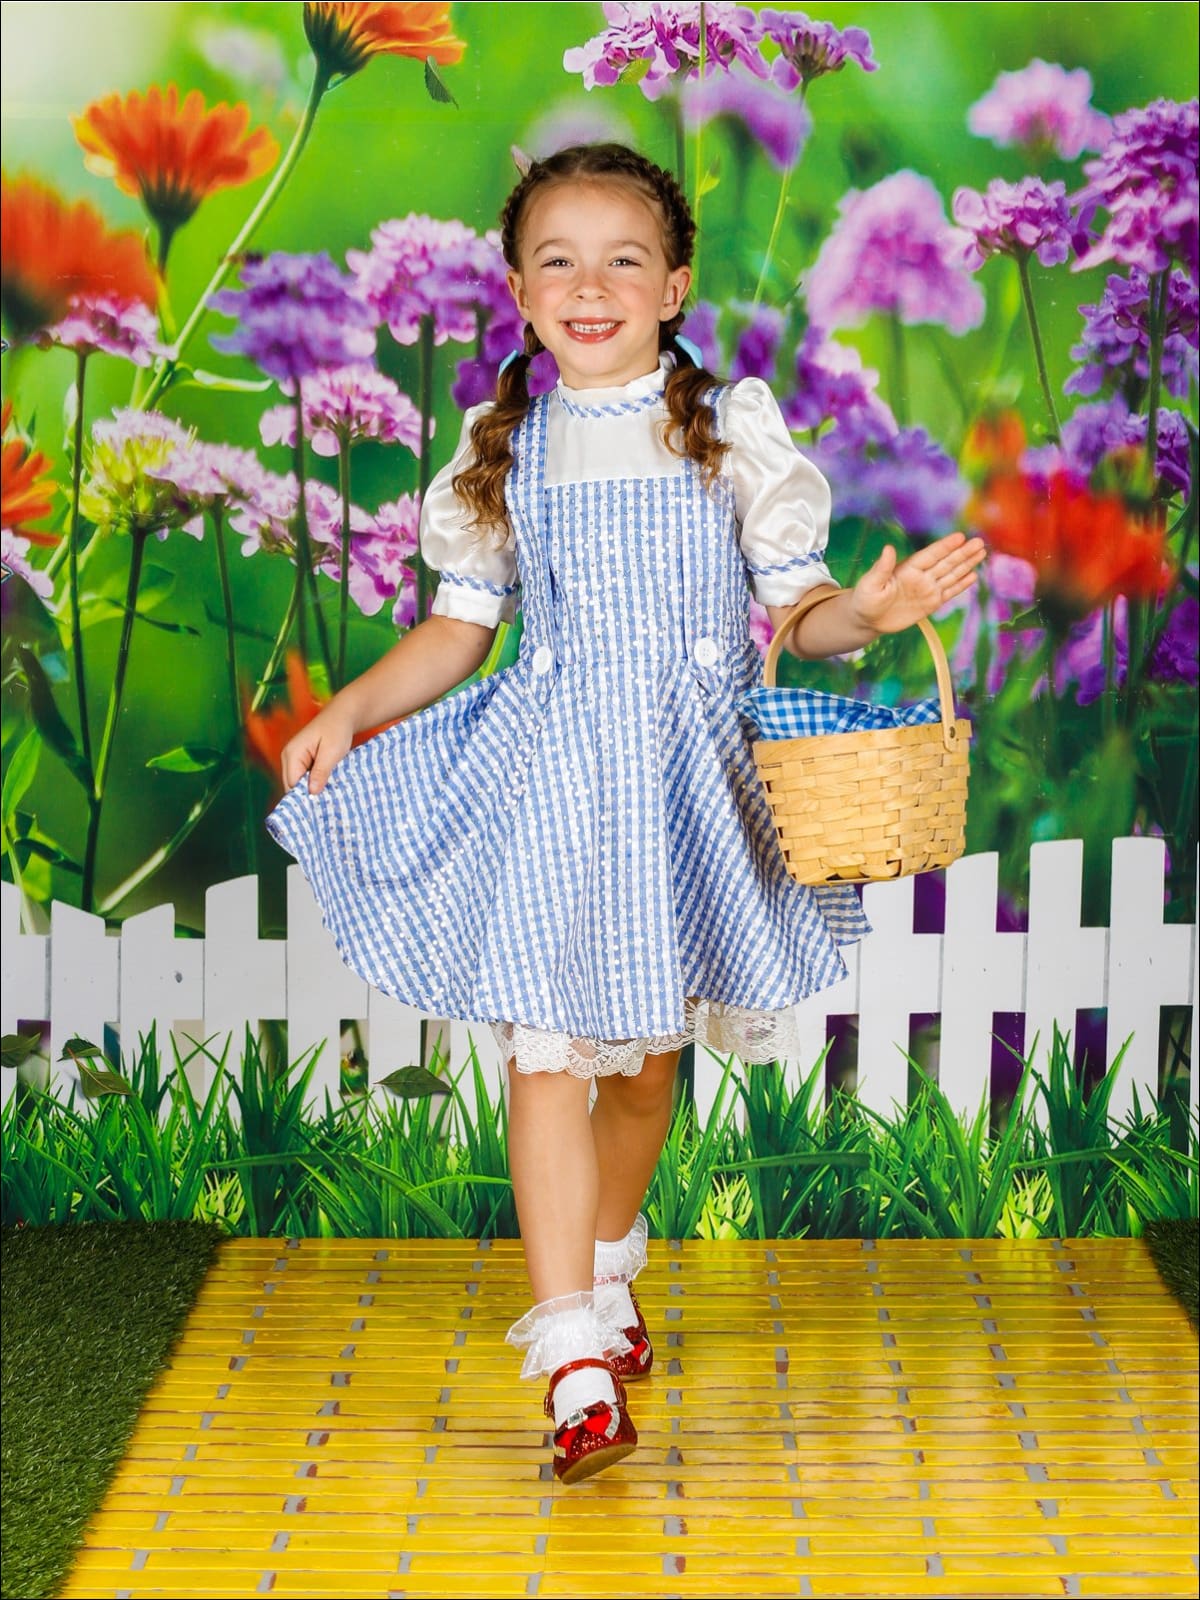 Girls Dorothy from Wizard of Oz Inspired Halloween Costume - Girls Halloween Costume